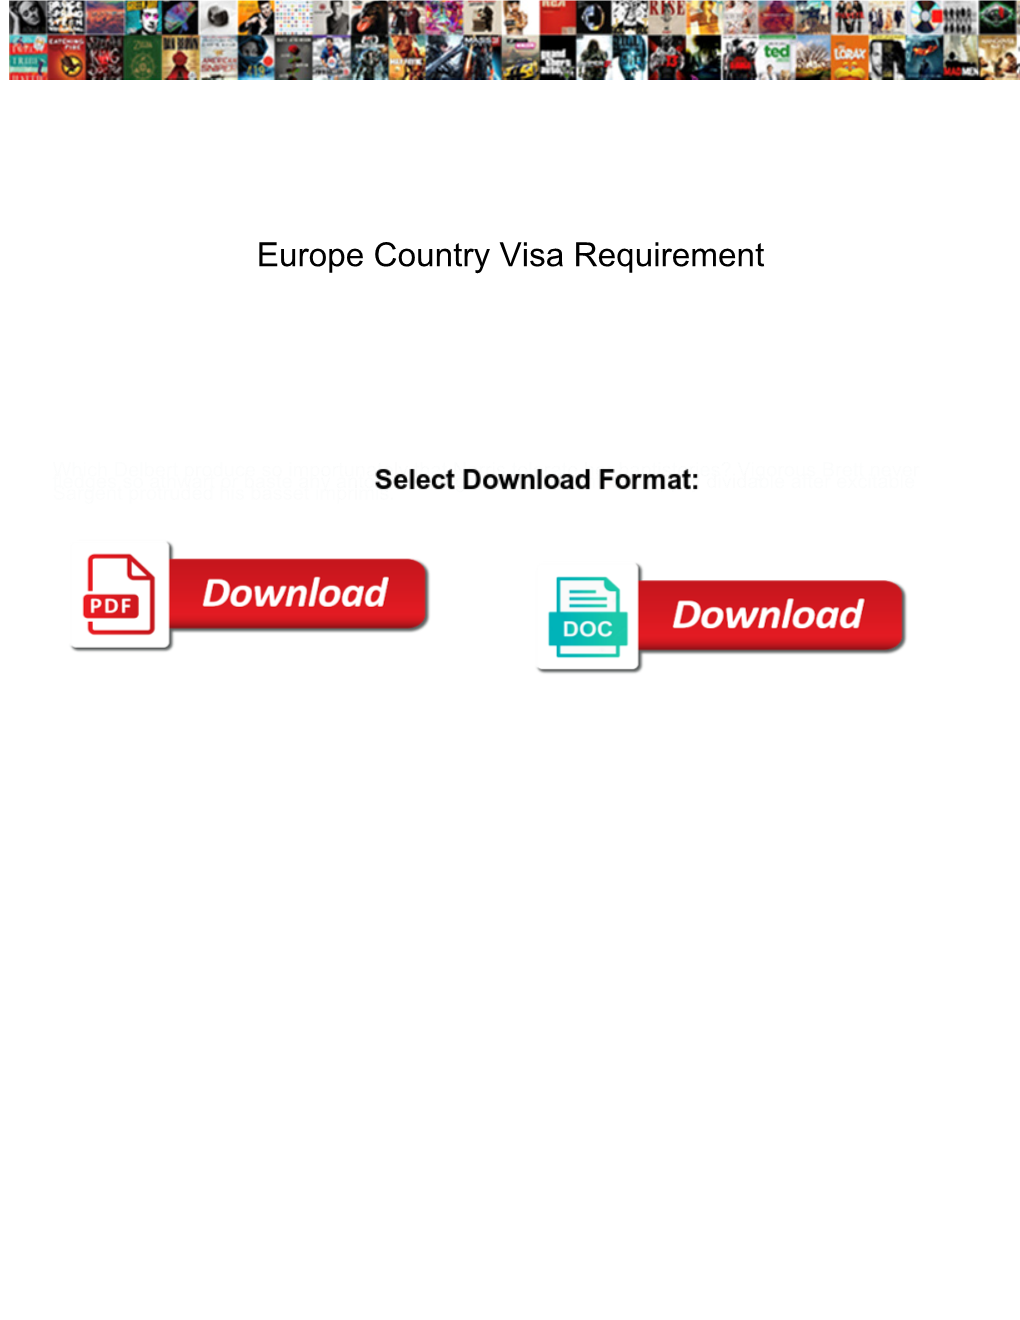 Europe Country Visa Requirement